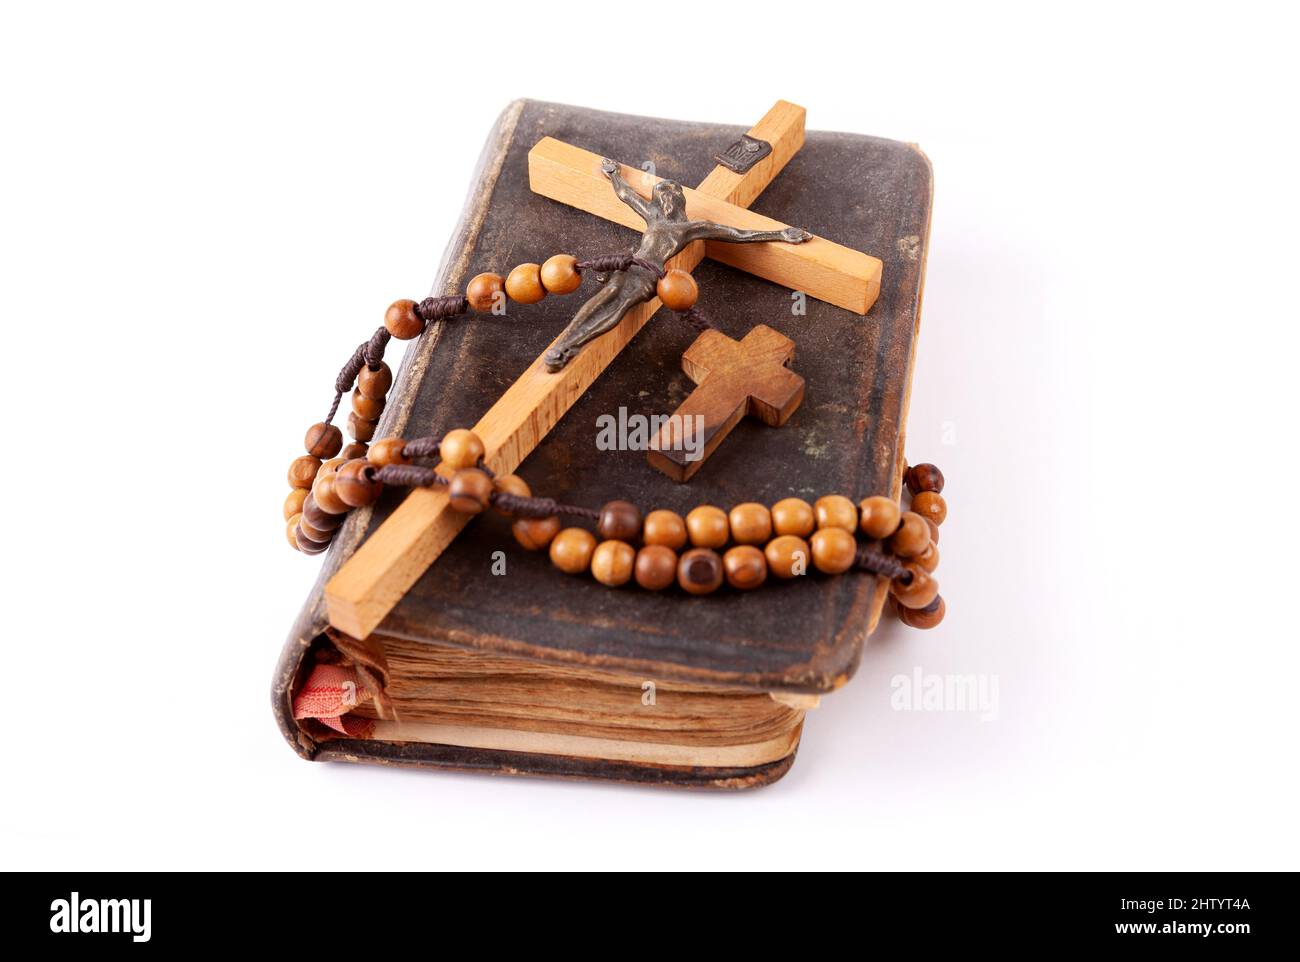 Old dusty prayer book, a cross and a rosary laying on top of it Christianity Catholicism traditional religious symbols, group of objects detail, close Stock Photo